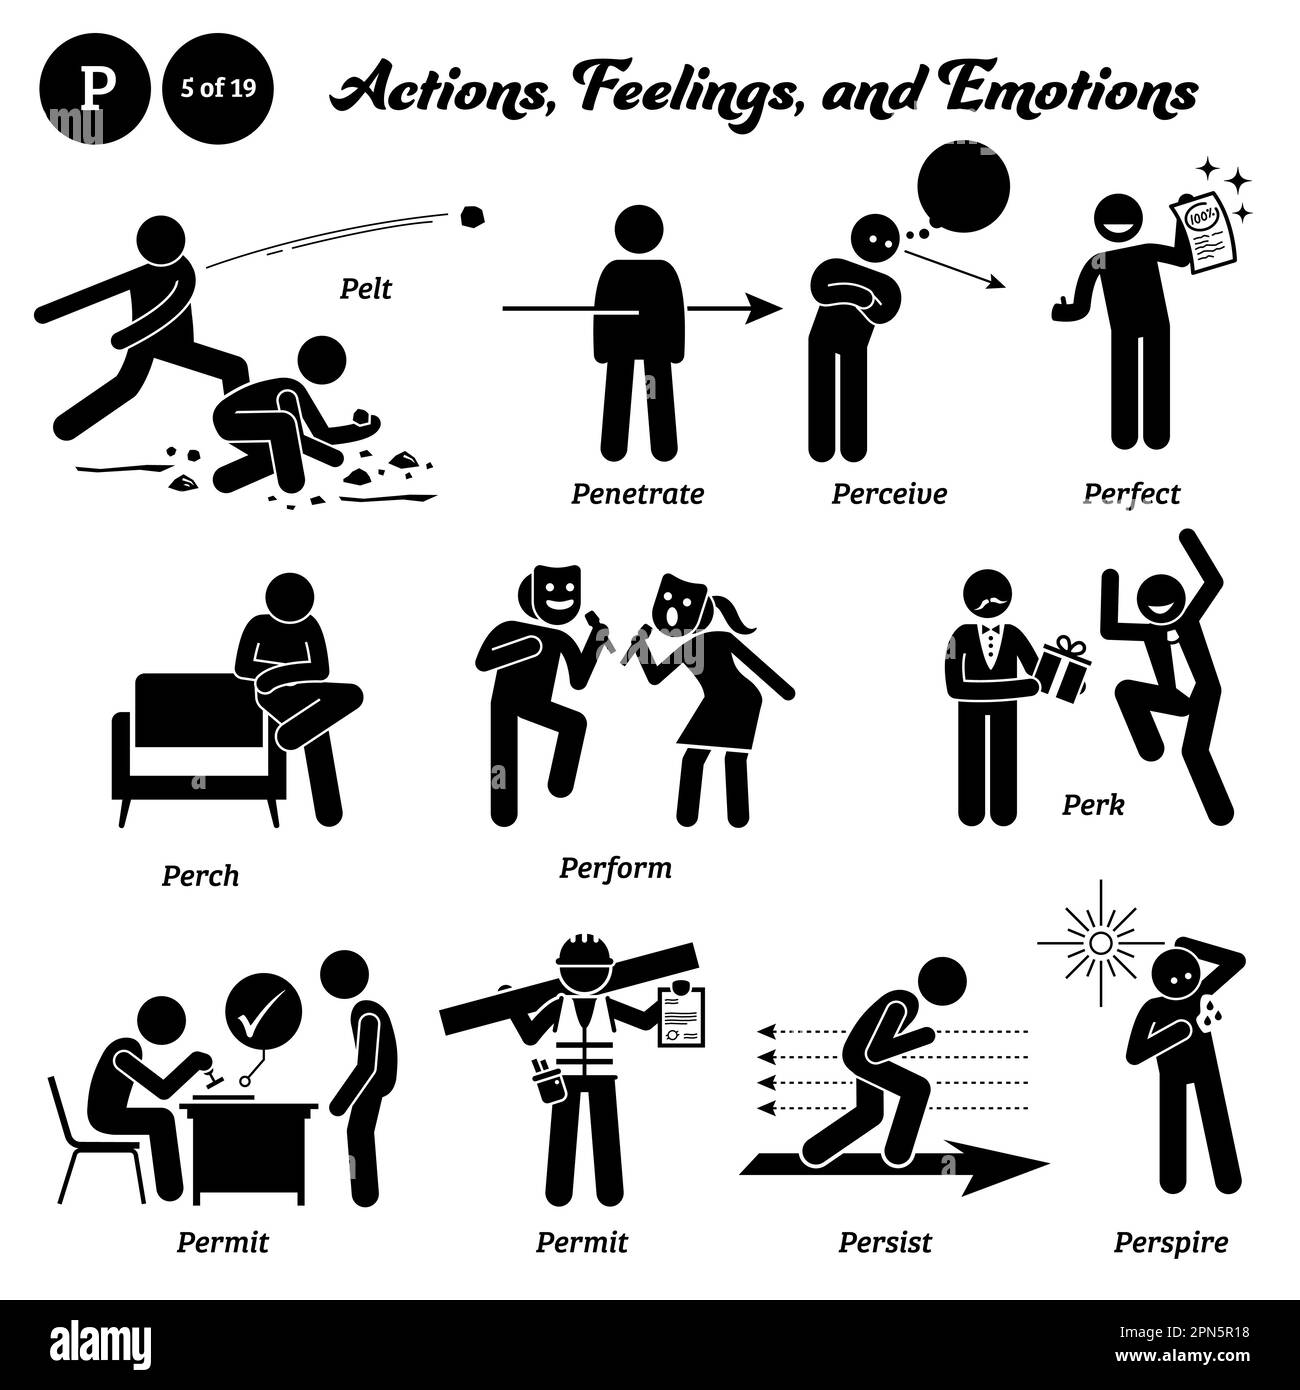 Stick figure human people man action, feelings, and emotions icons alphabet P. Pelt, penetrate, perceive, perfect, perch, perform, perk, permit, persi Stock Vector